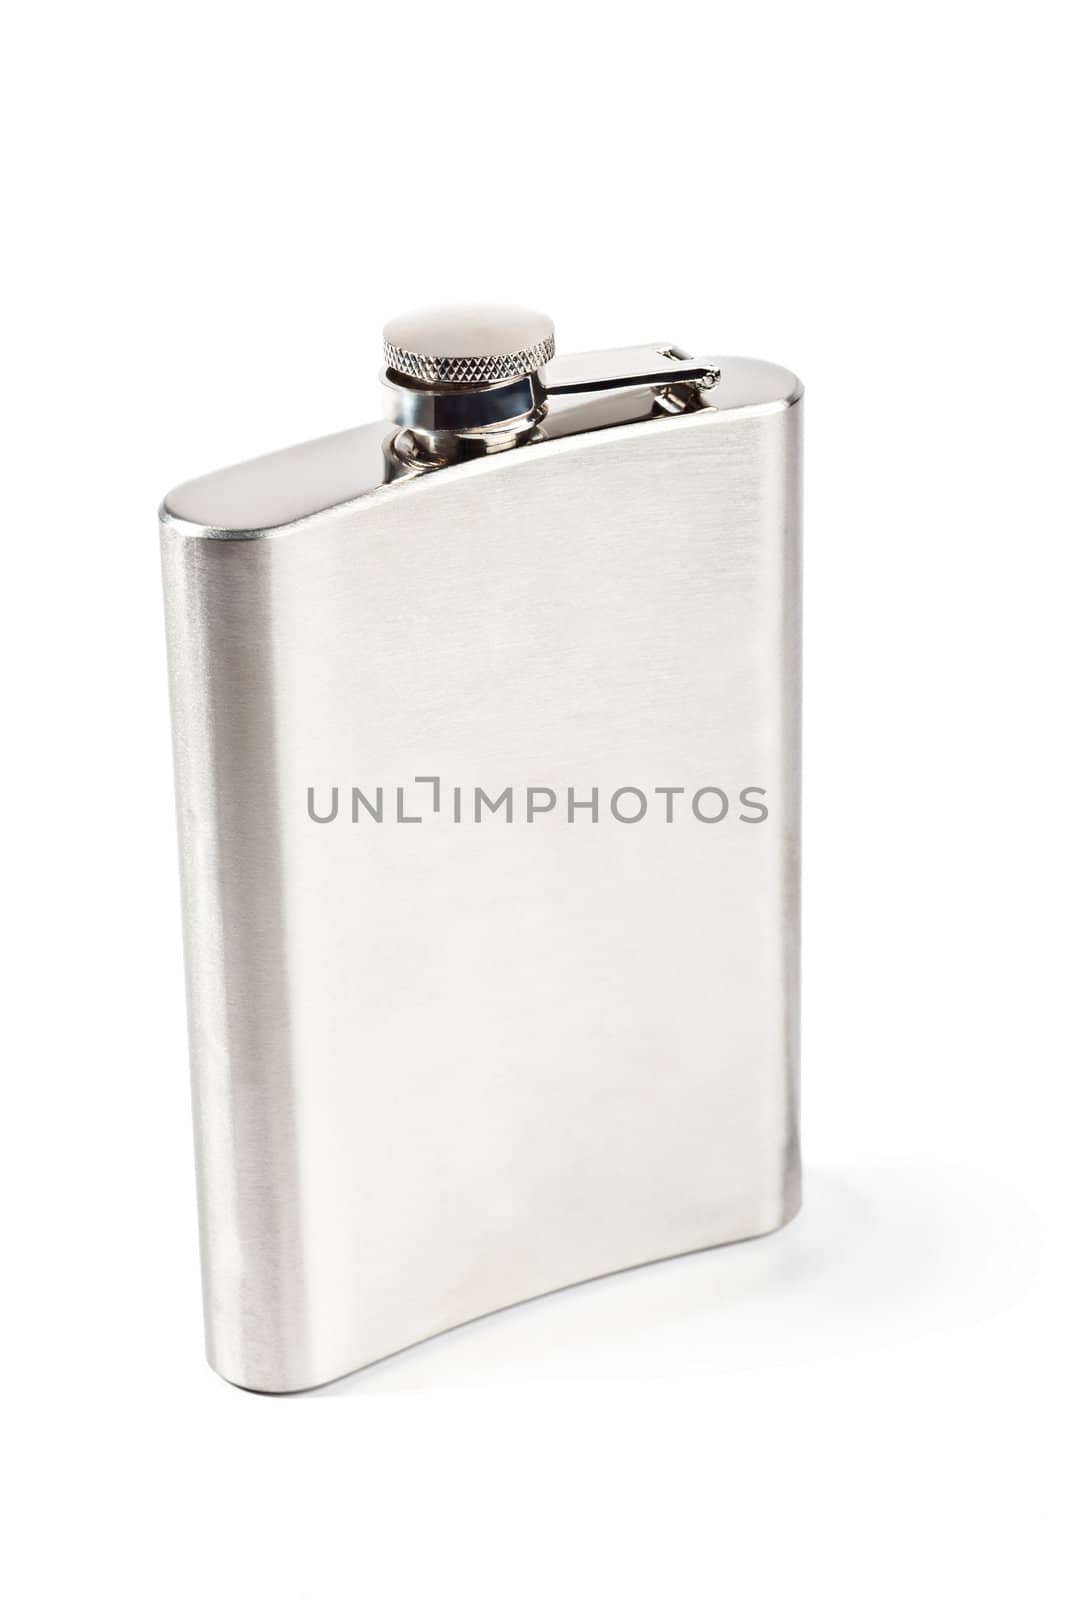 Stainless hip flask by dimol